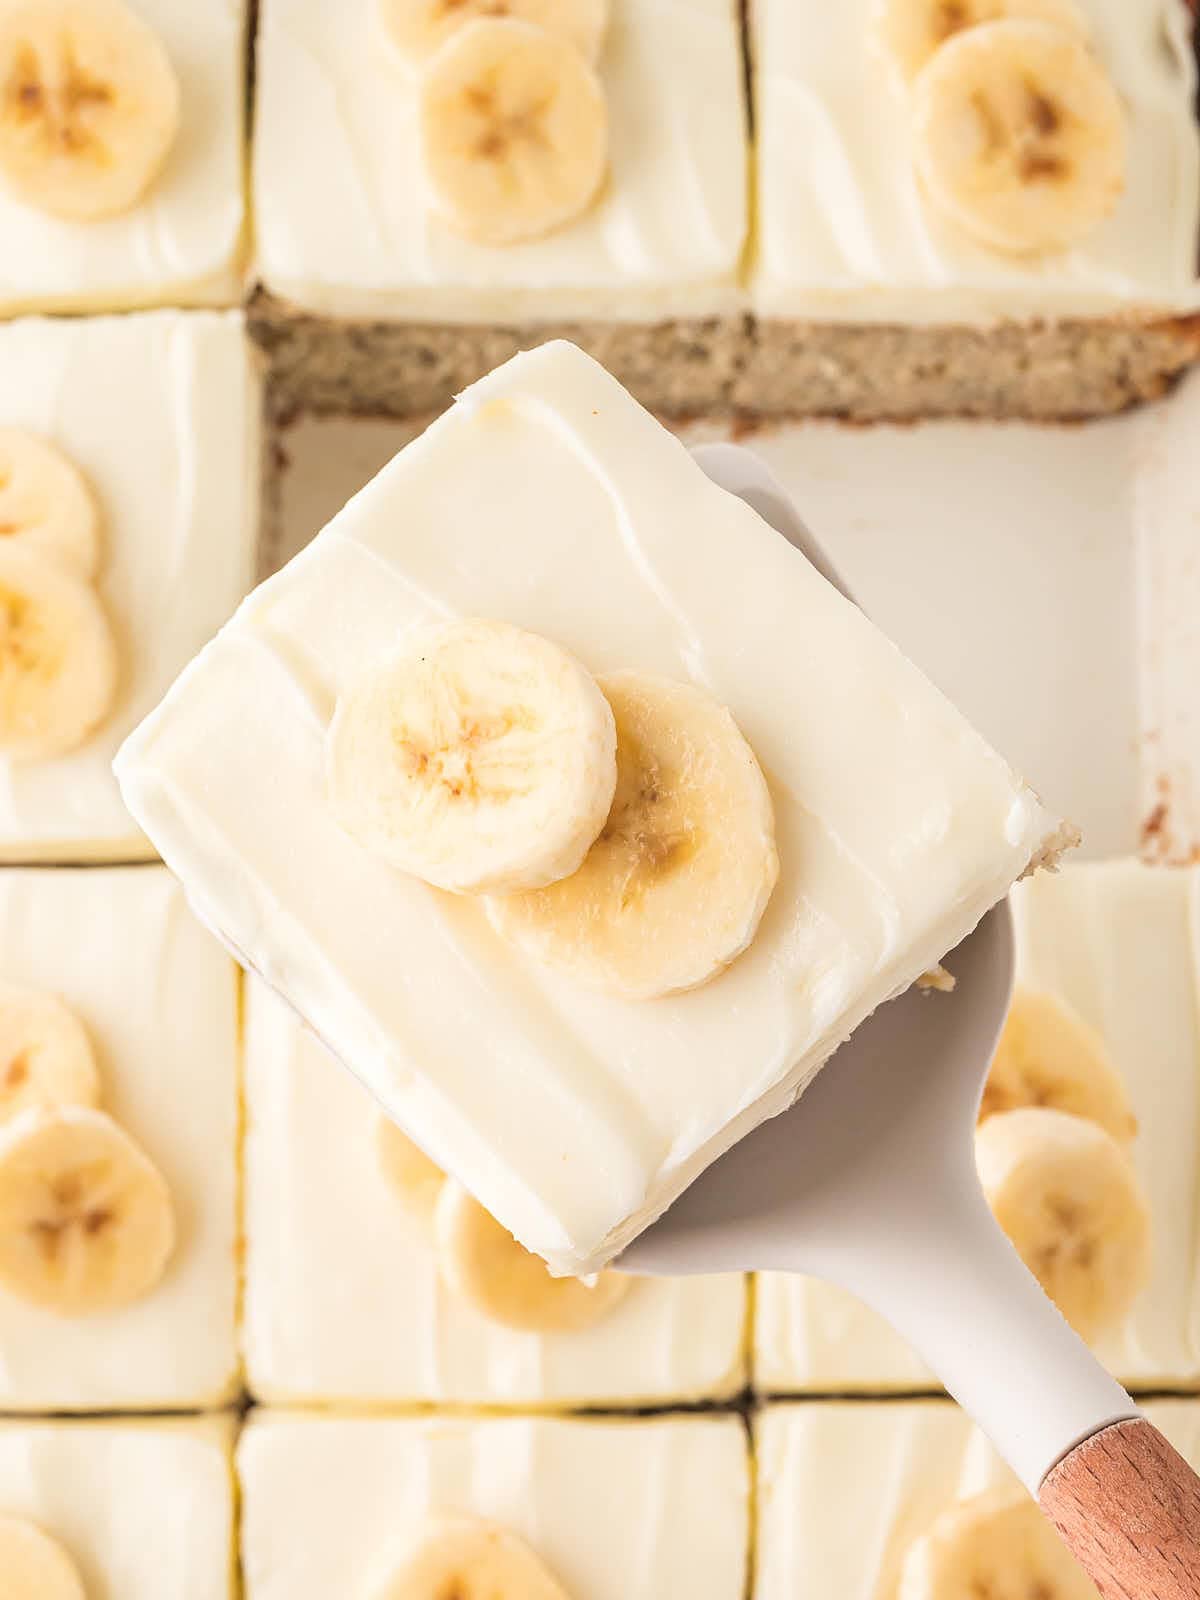 Top down view of a slice of banana cake being served.